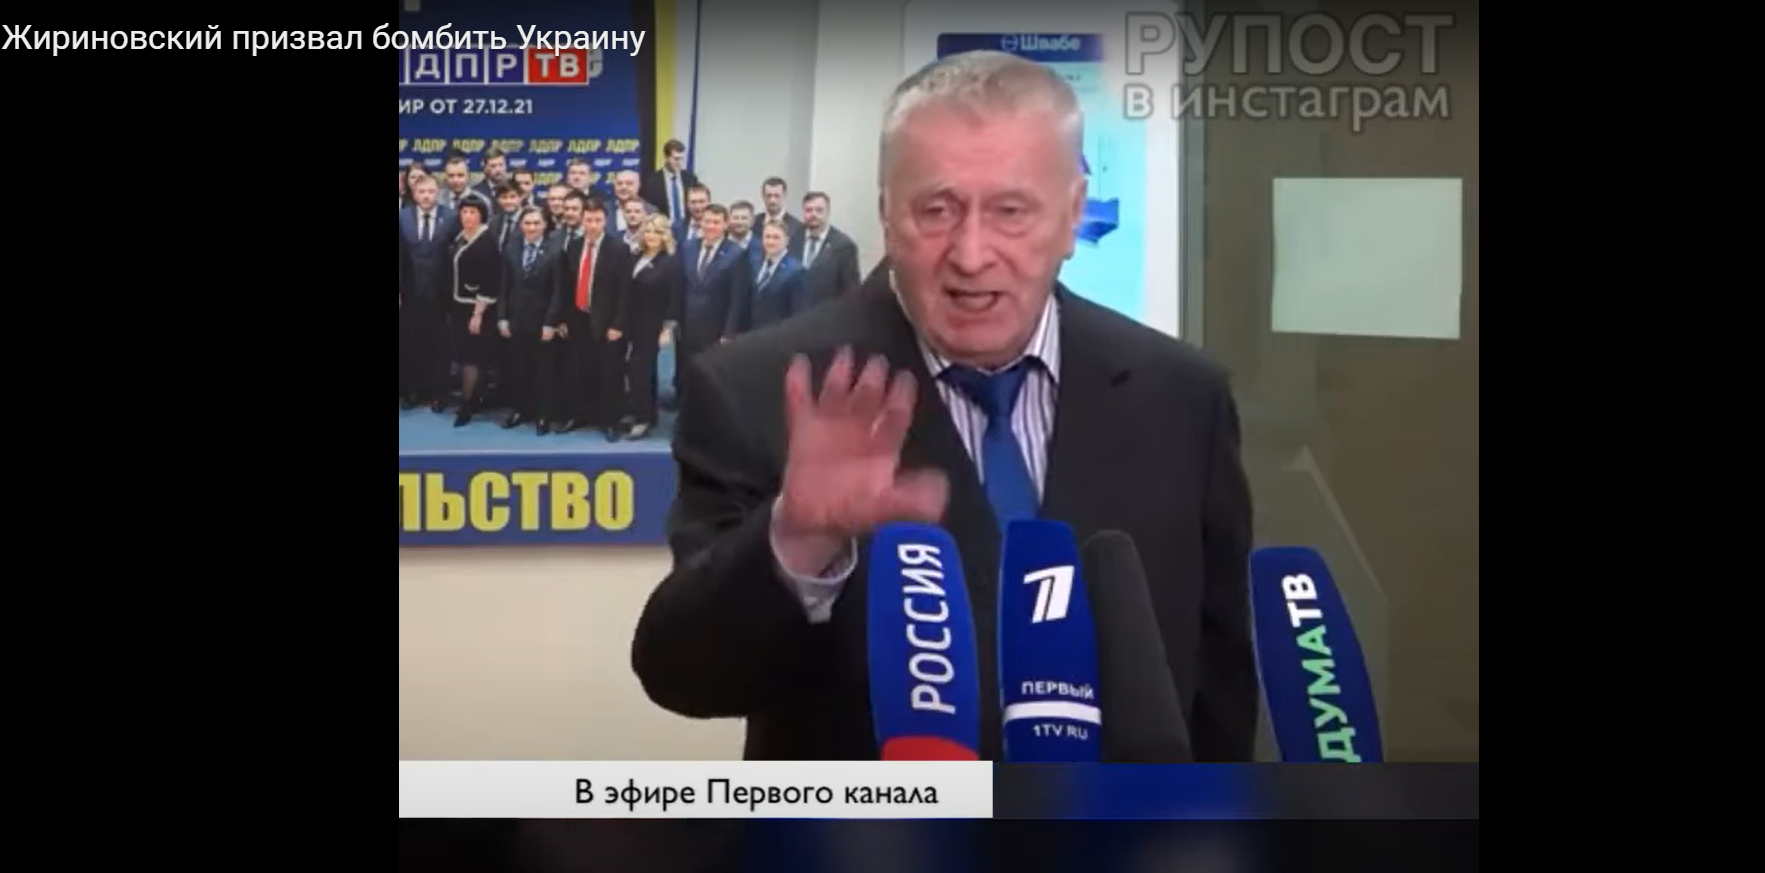 Question of the day for Bastrykin: how did you assess Zhirinovsky's public call for war?